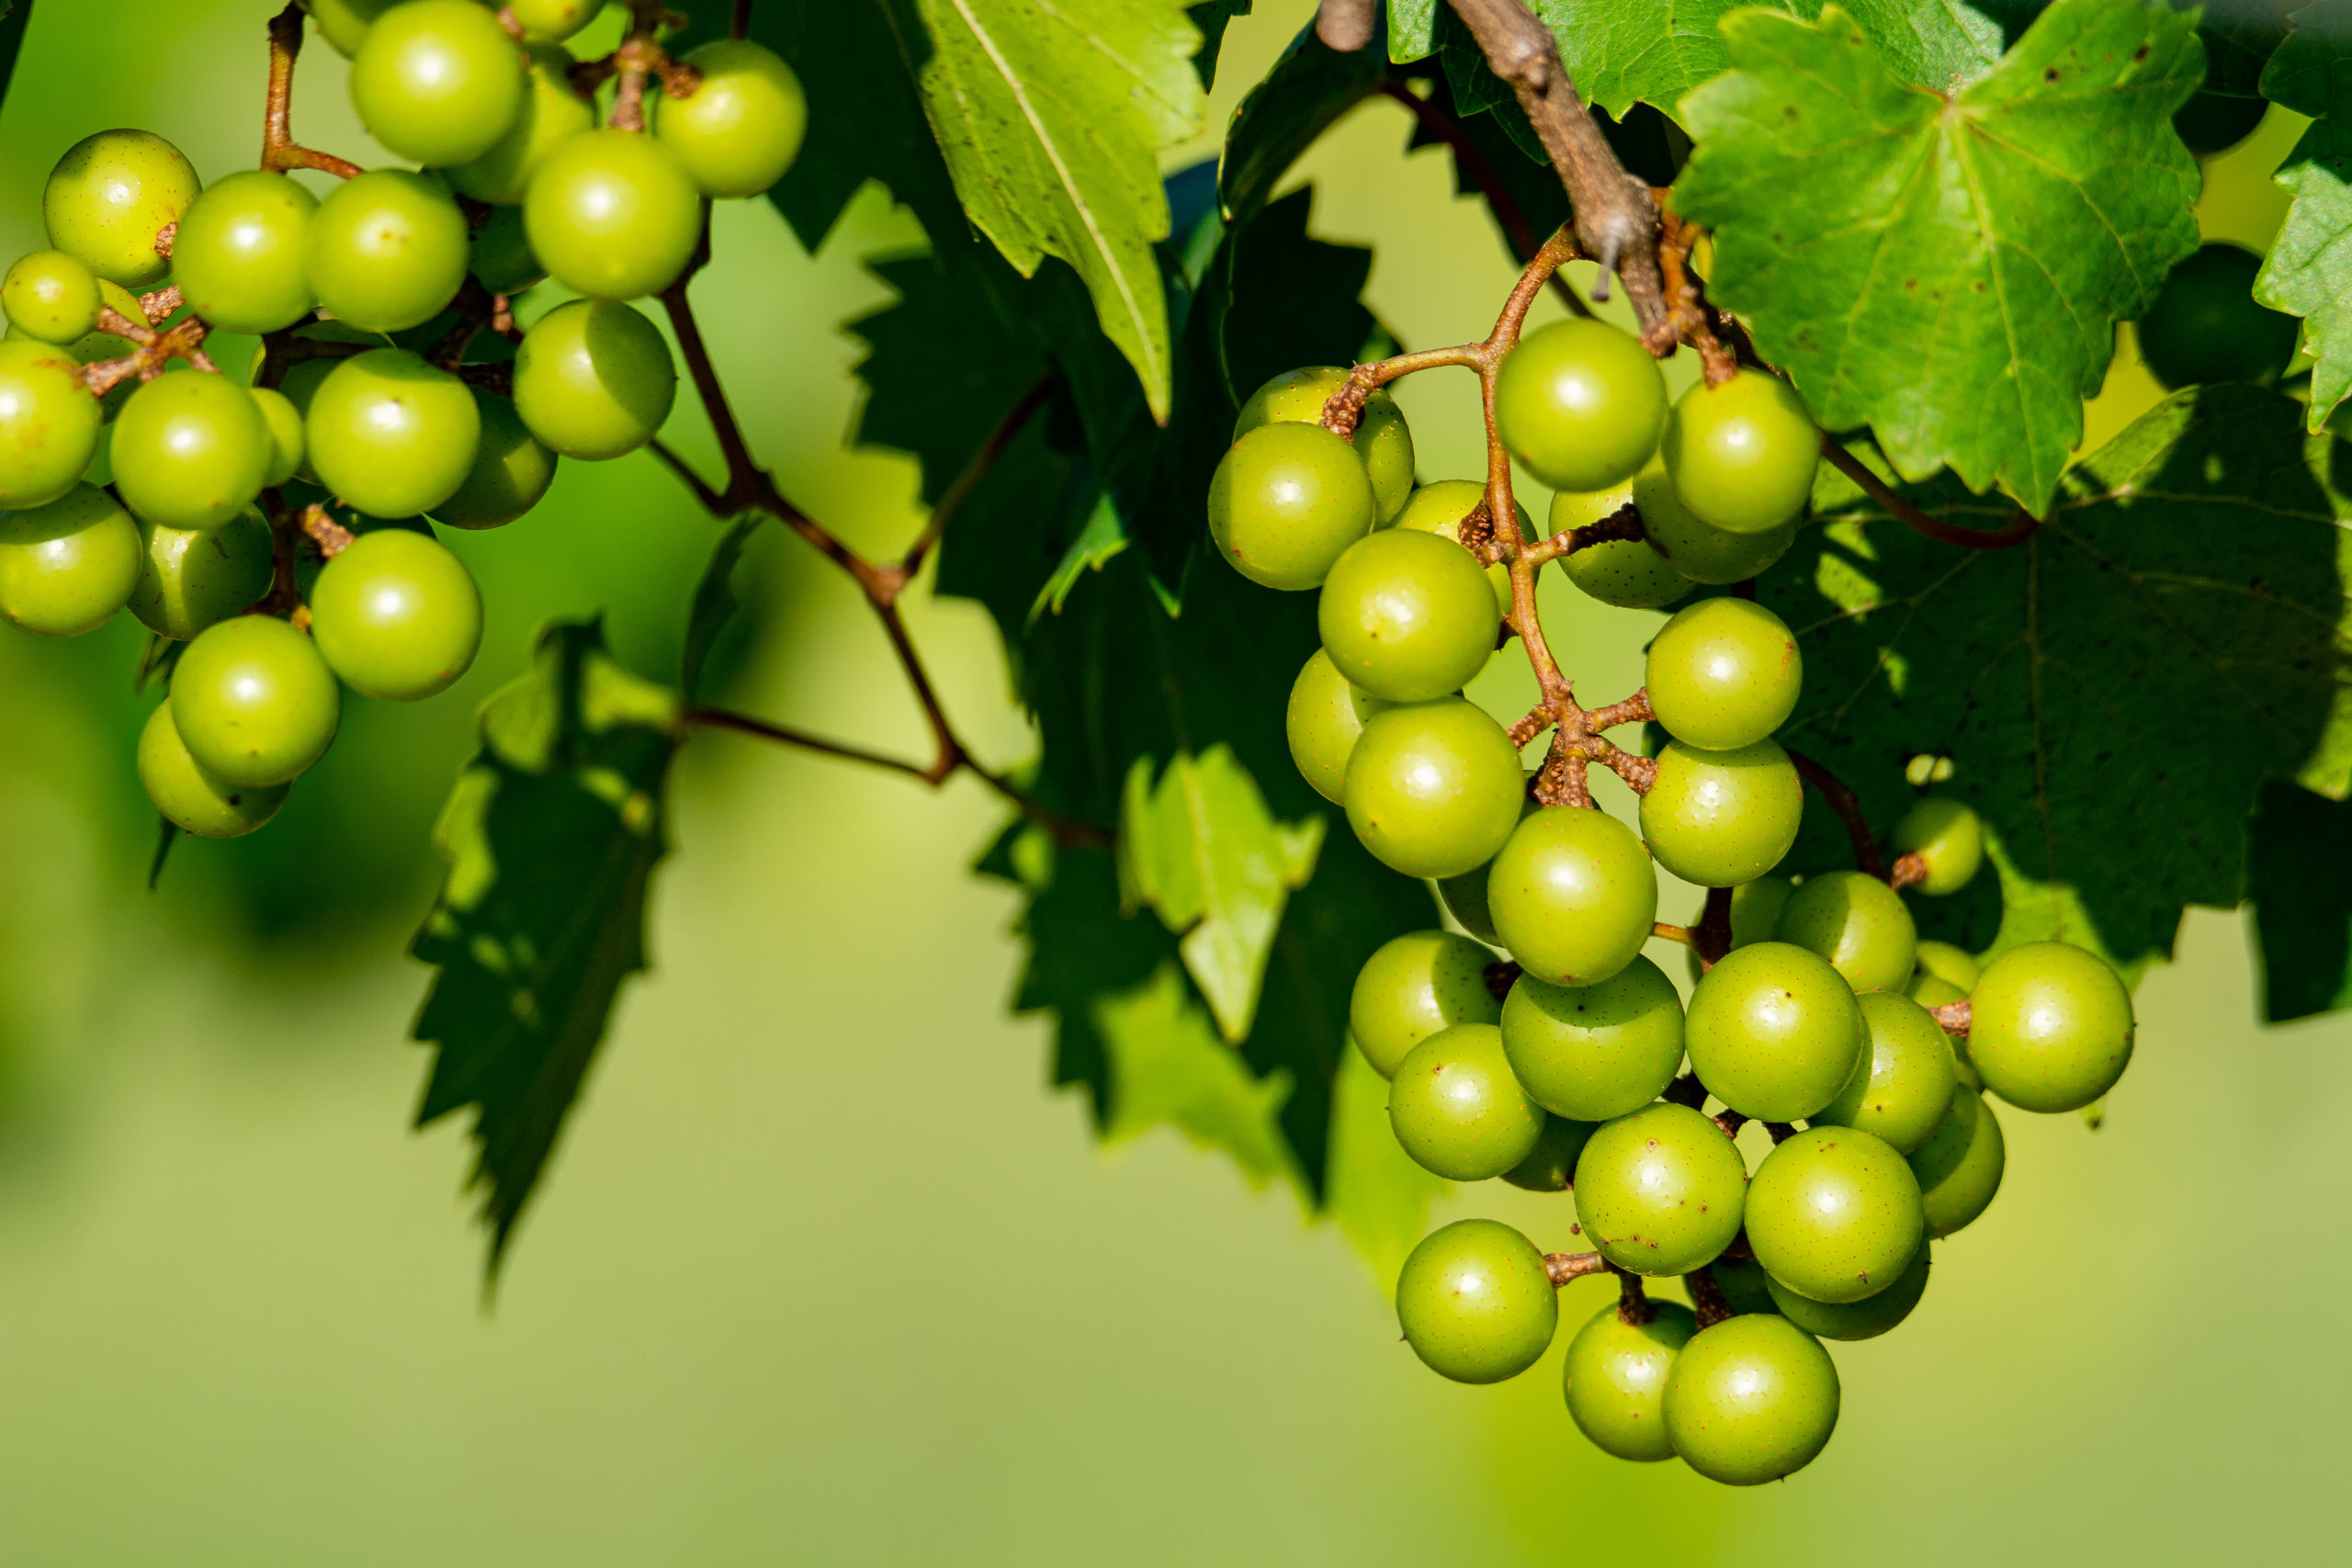 Image of grape cluster on the vine at a very early stage with small green berries